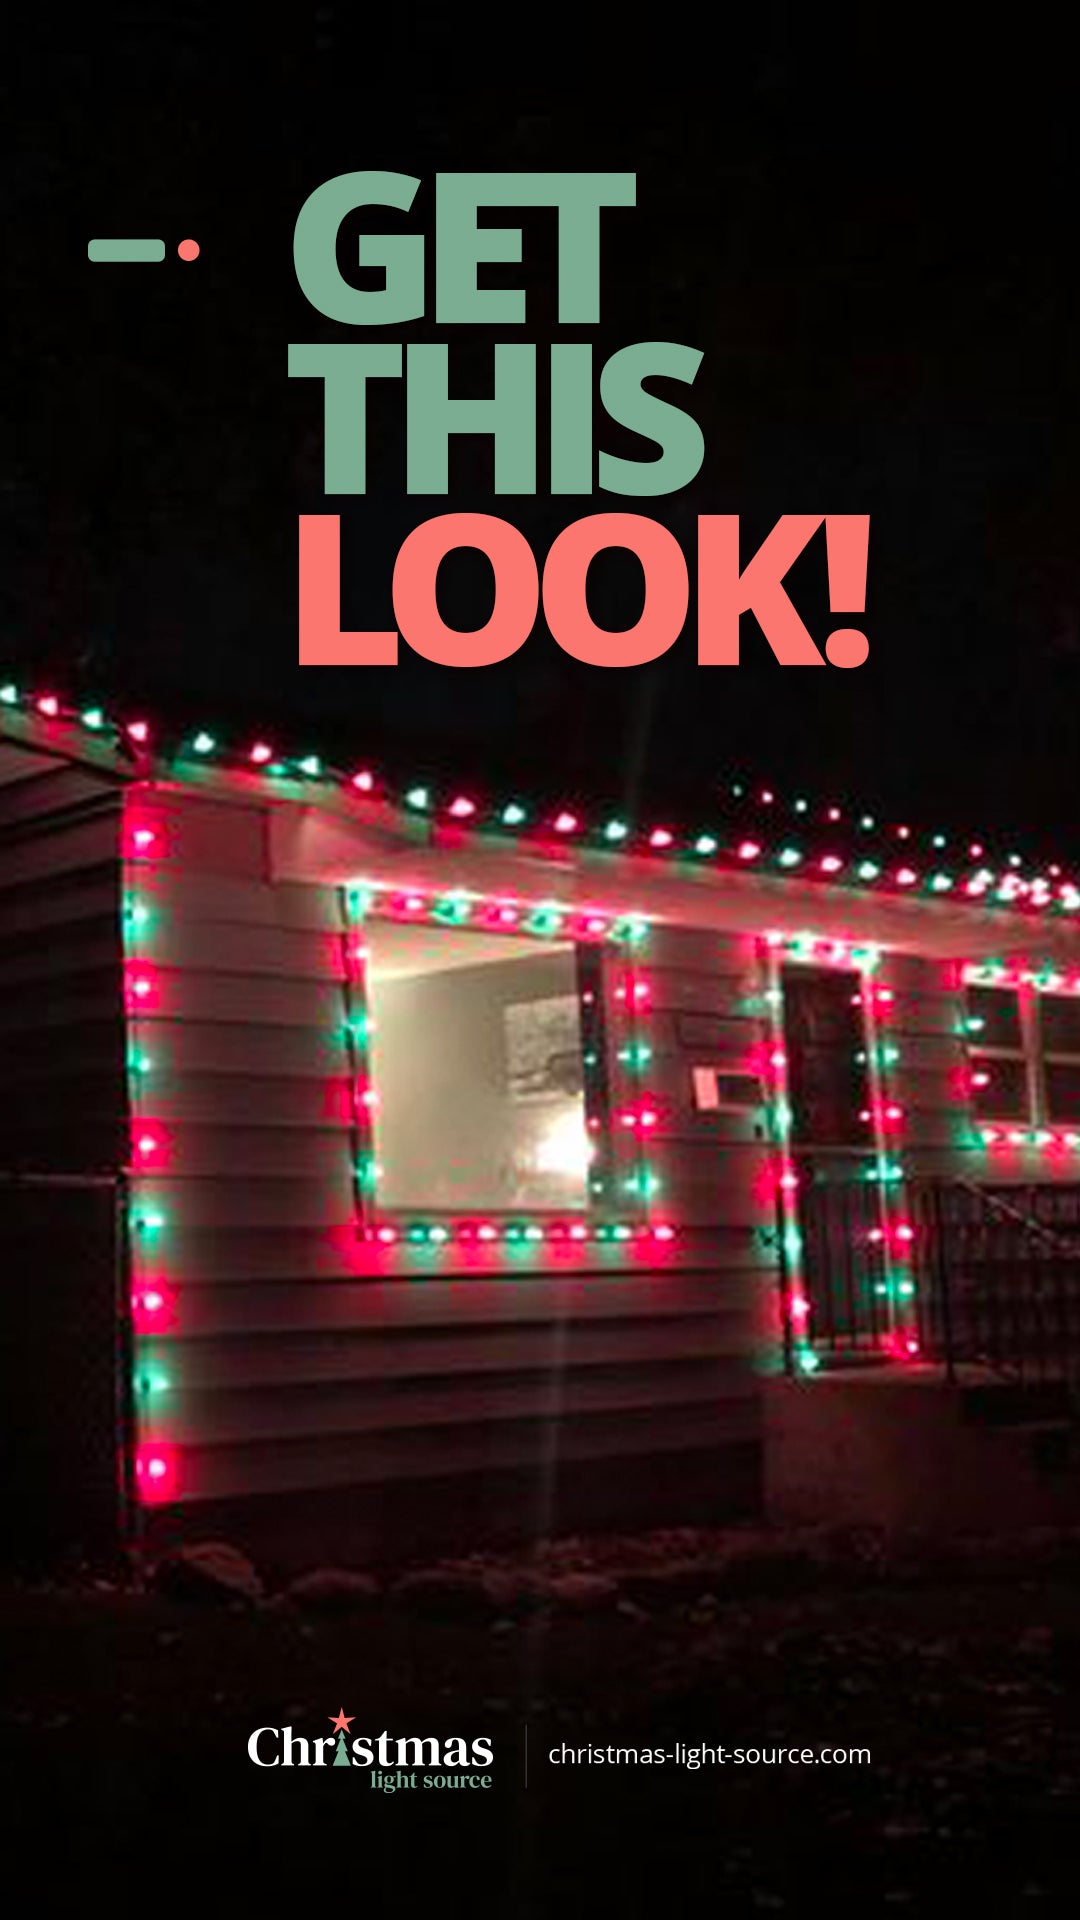 Get this Look! Retro red and green bulbs